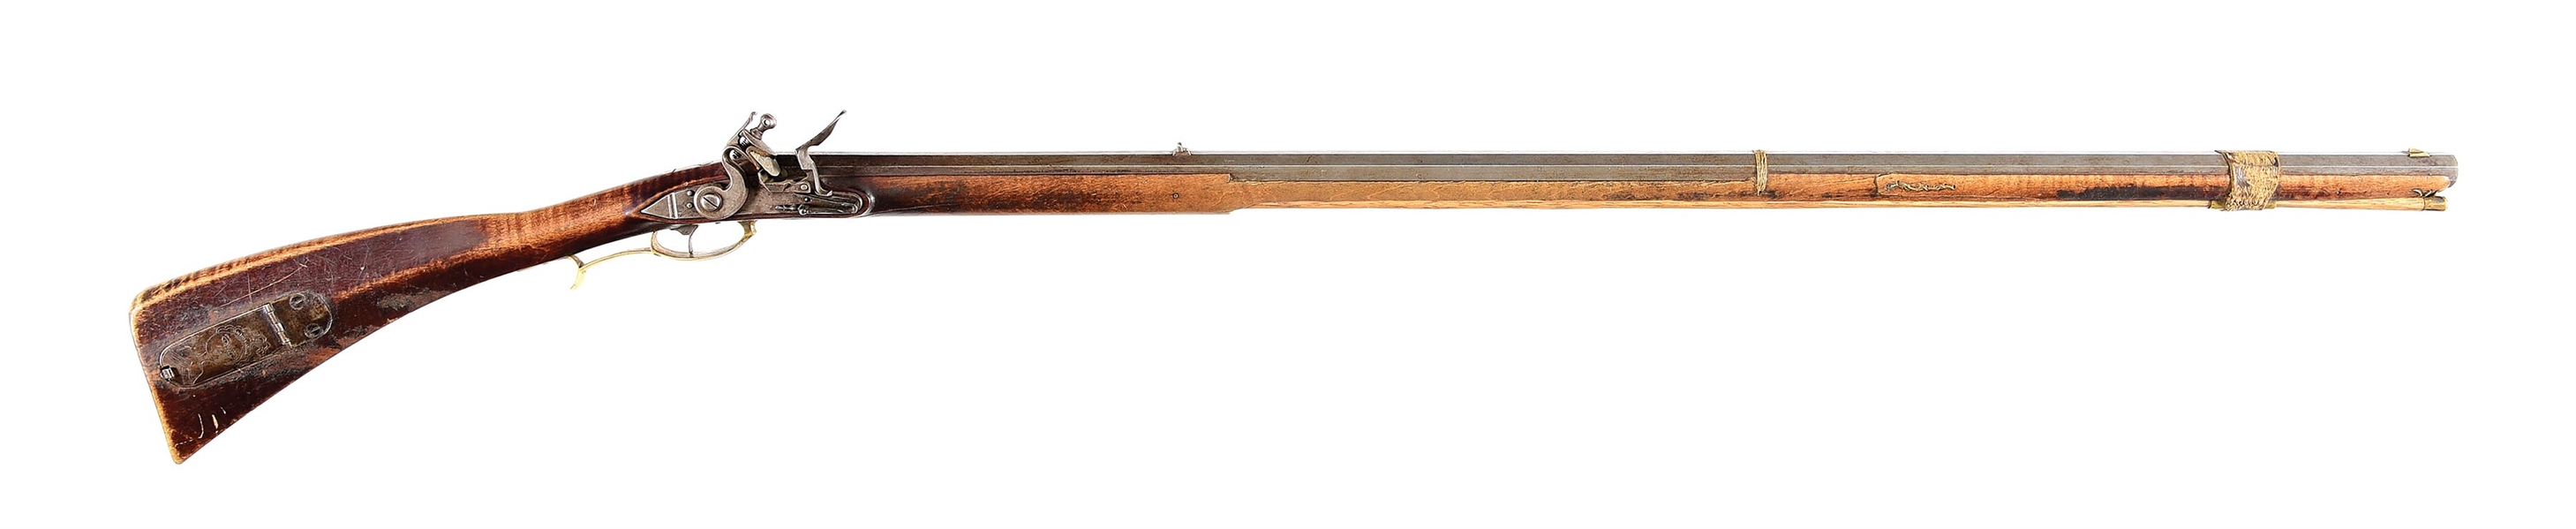 (A) INTERESTING CONTEMPORARY ALLENTOWN FLINTLOCK RIFLE WITH LEATHER SCABBARD.